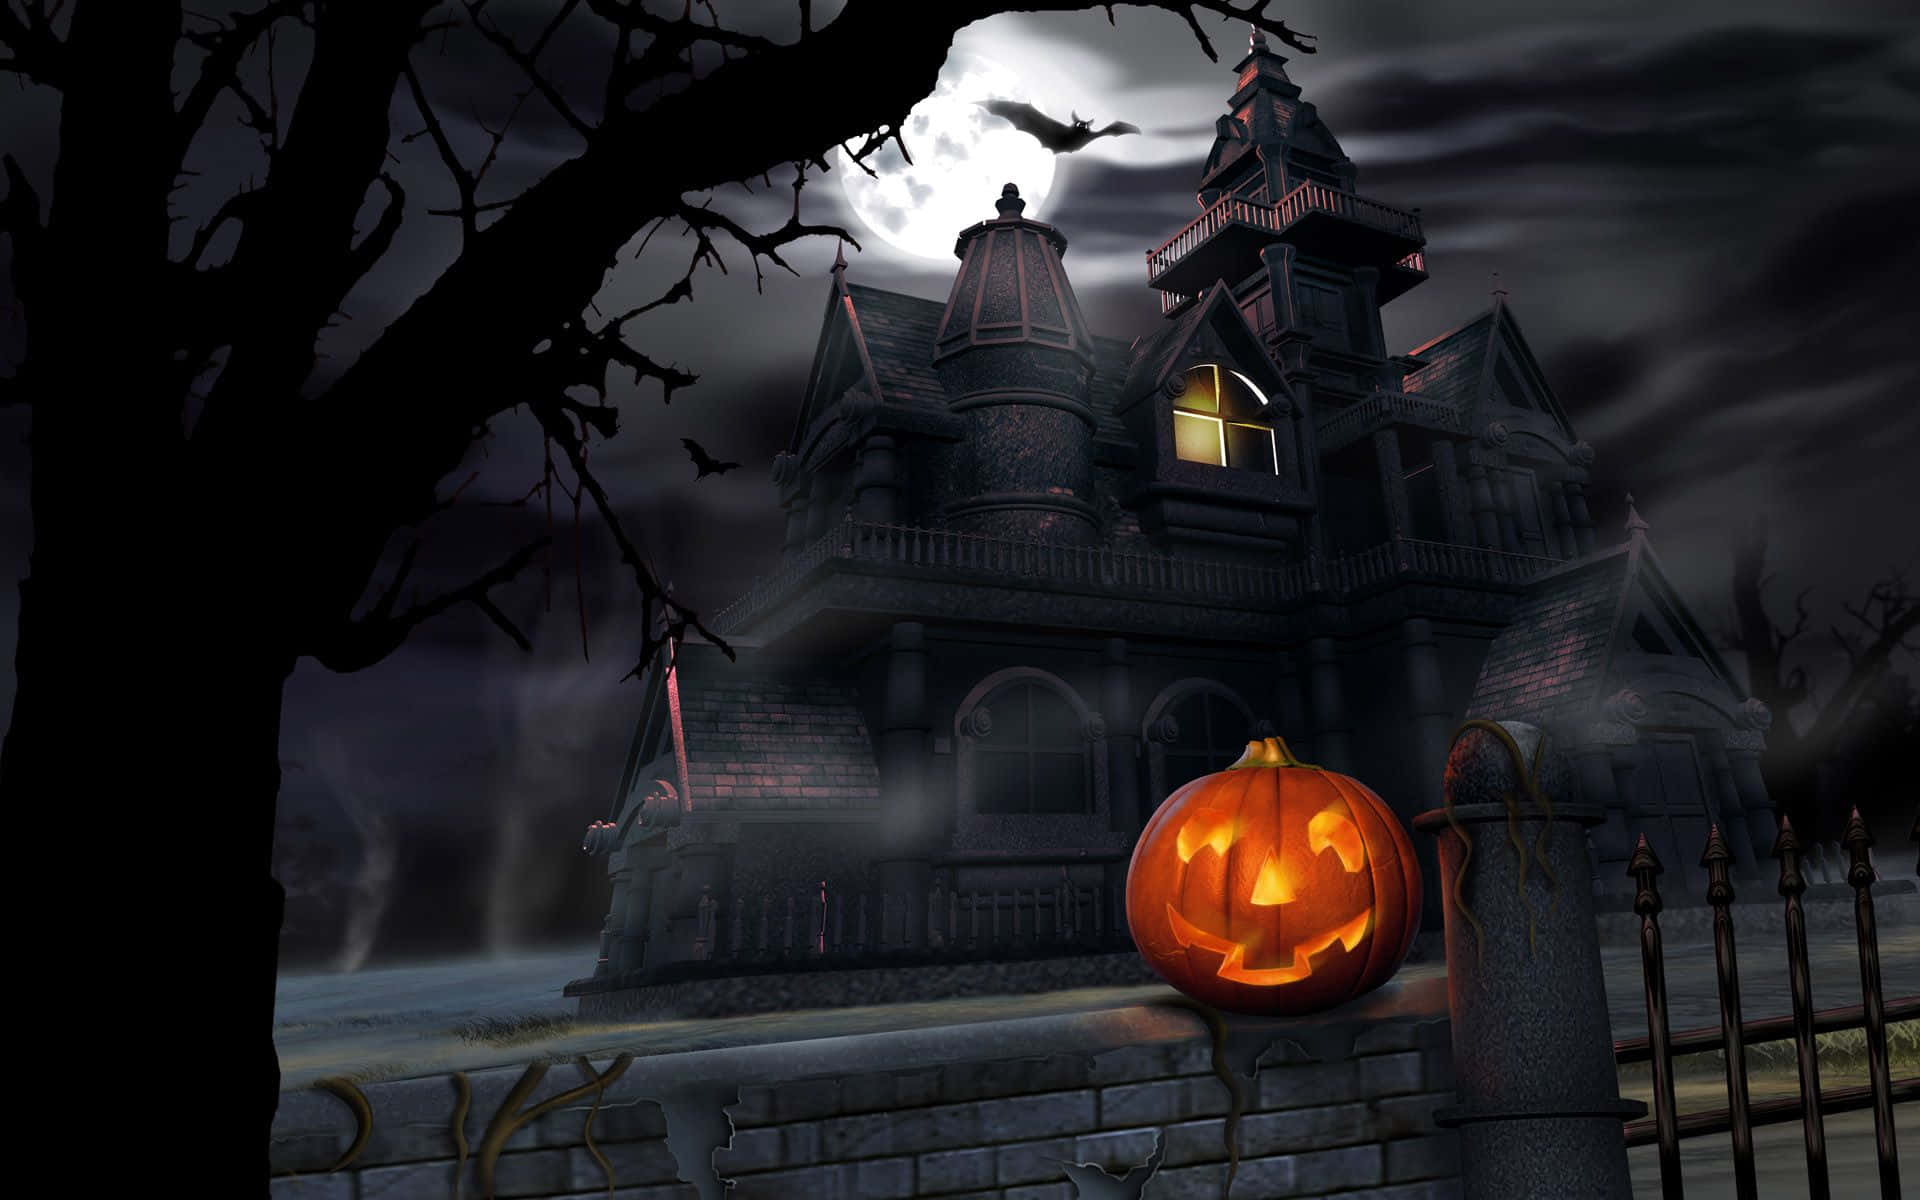 Get ready to have fun this Halloween with spooky decorations! Wallpaper